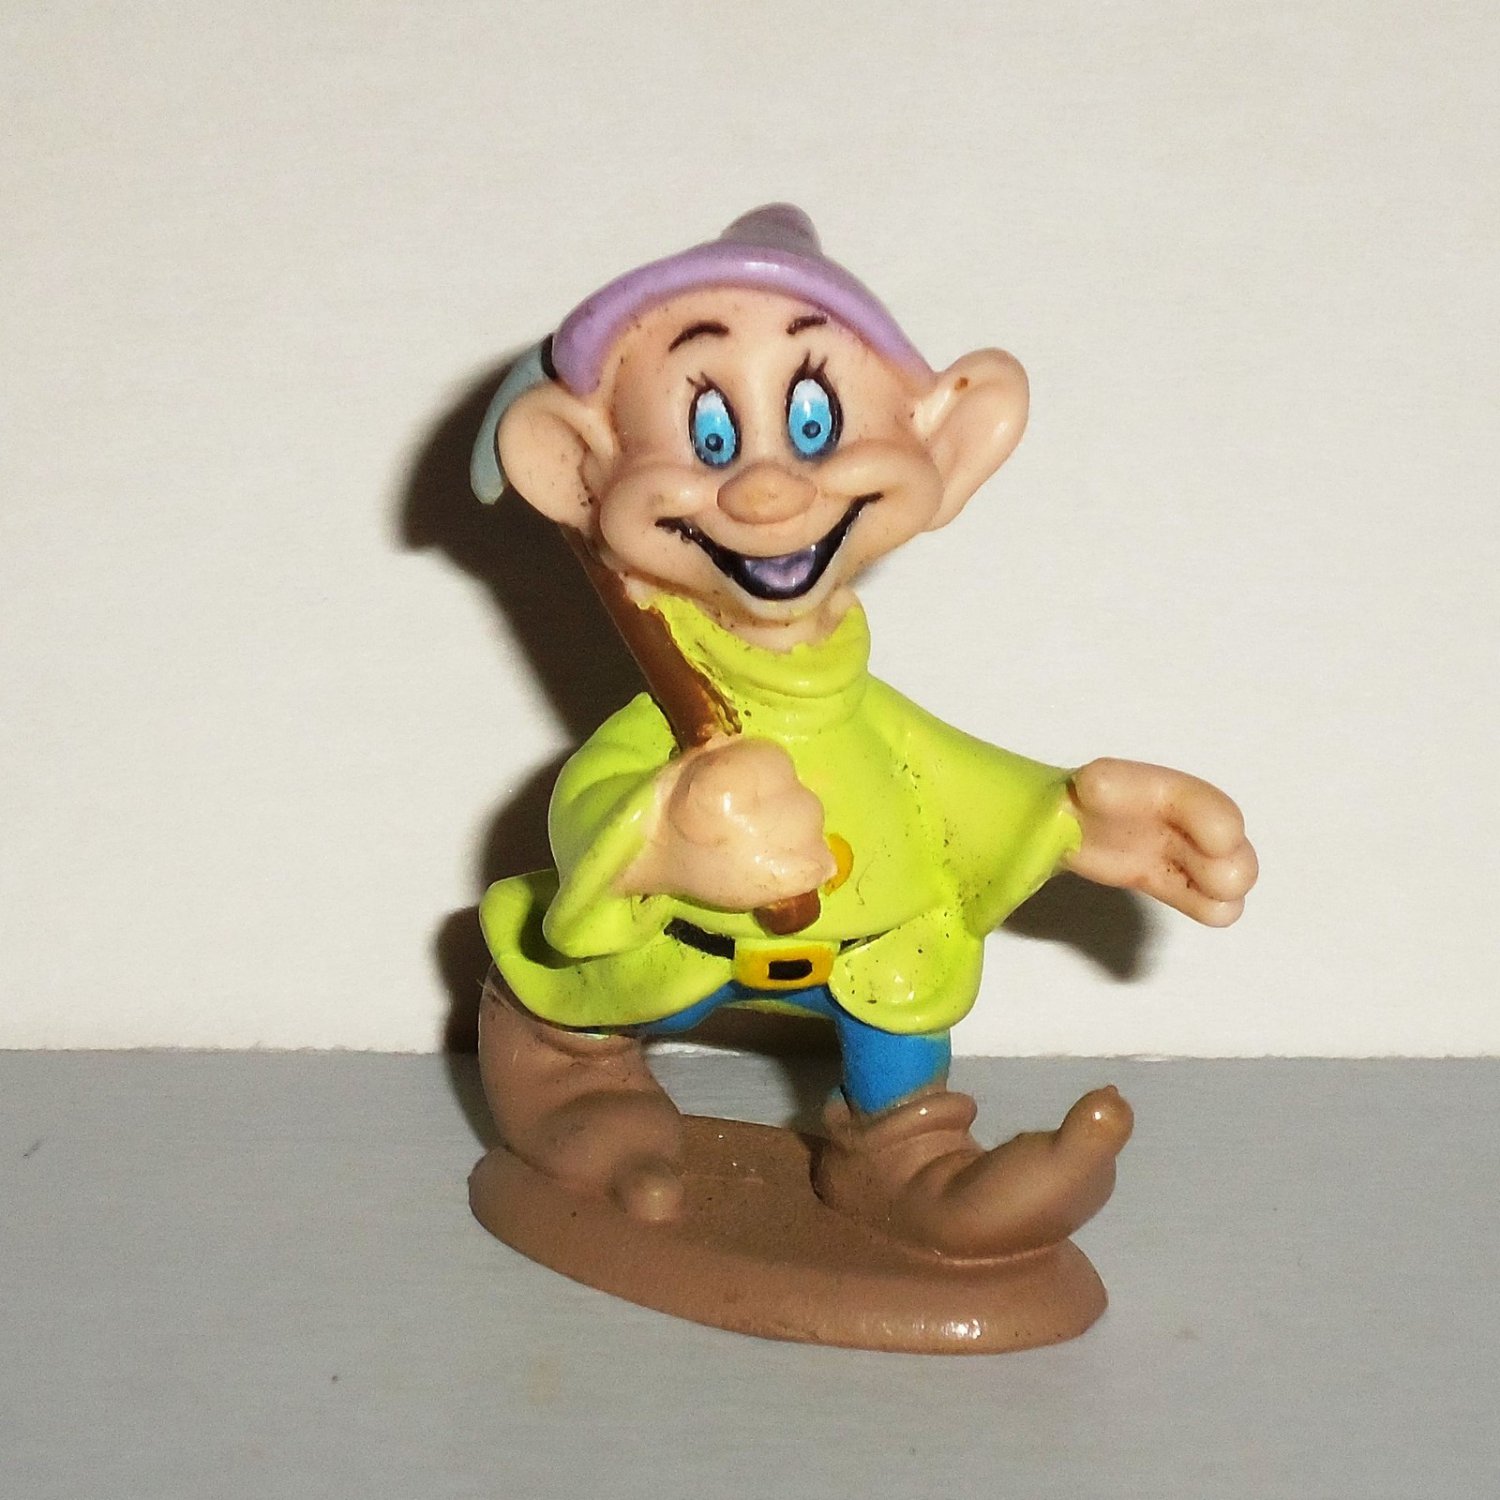 Disneys Snow White And The Seven Dwarfs Dopey Pvc Figure Loose Used 